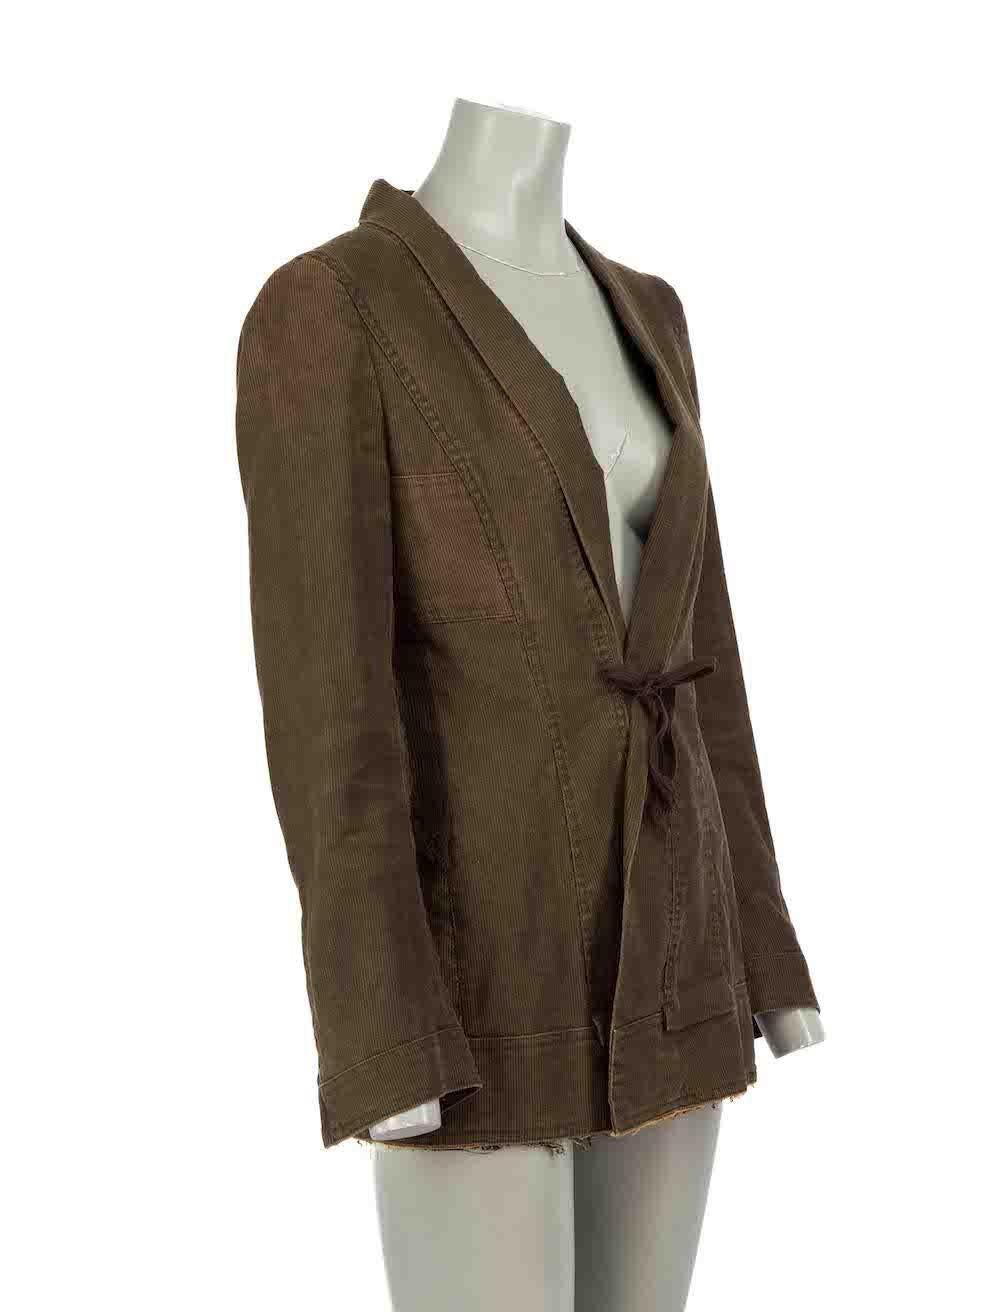 CONDITION is Very good. Hardly any visible wear to jacket is evident on this used Dries Van Noten designer resale item.
 
 Details
 Khaki
 Corduroy
 Fitted jacket
 Tie strap closure
 Slit on cuffs
 Frayed hemline
 Brown taping trim on side
 
 Made